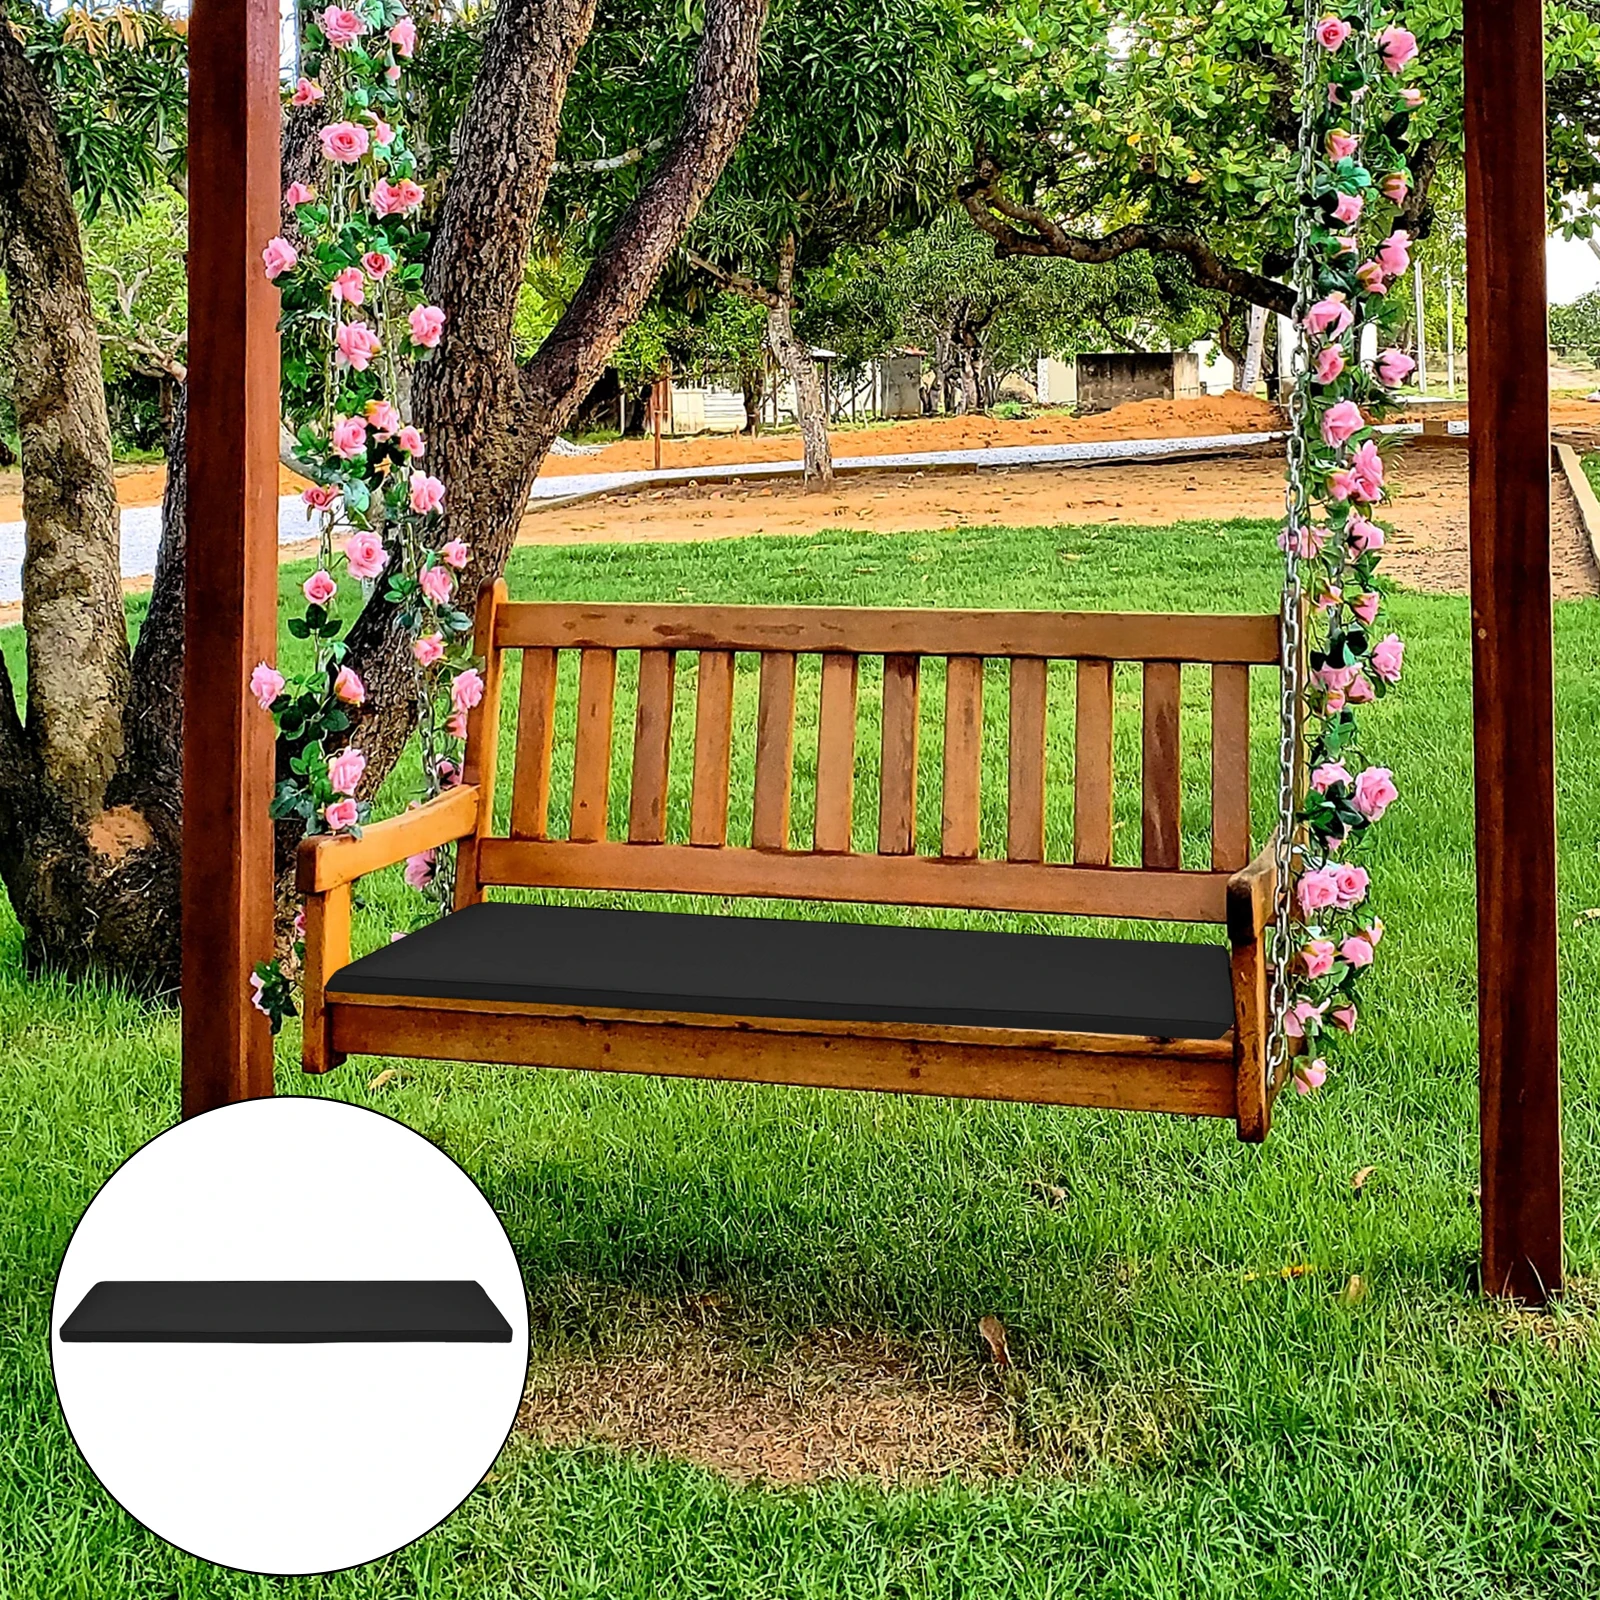 Waterproof Fabric Garden Bench Settee Patio Furniture Pad Seat Pads Chair Cushion Swing Loveseat 3 Seater Outdoor